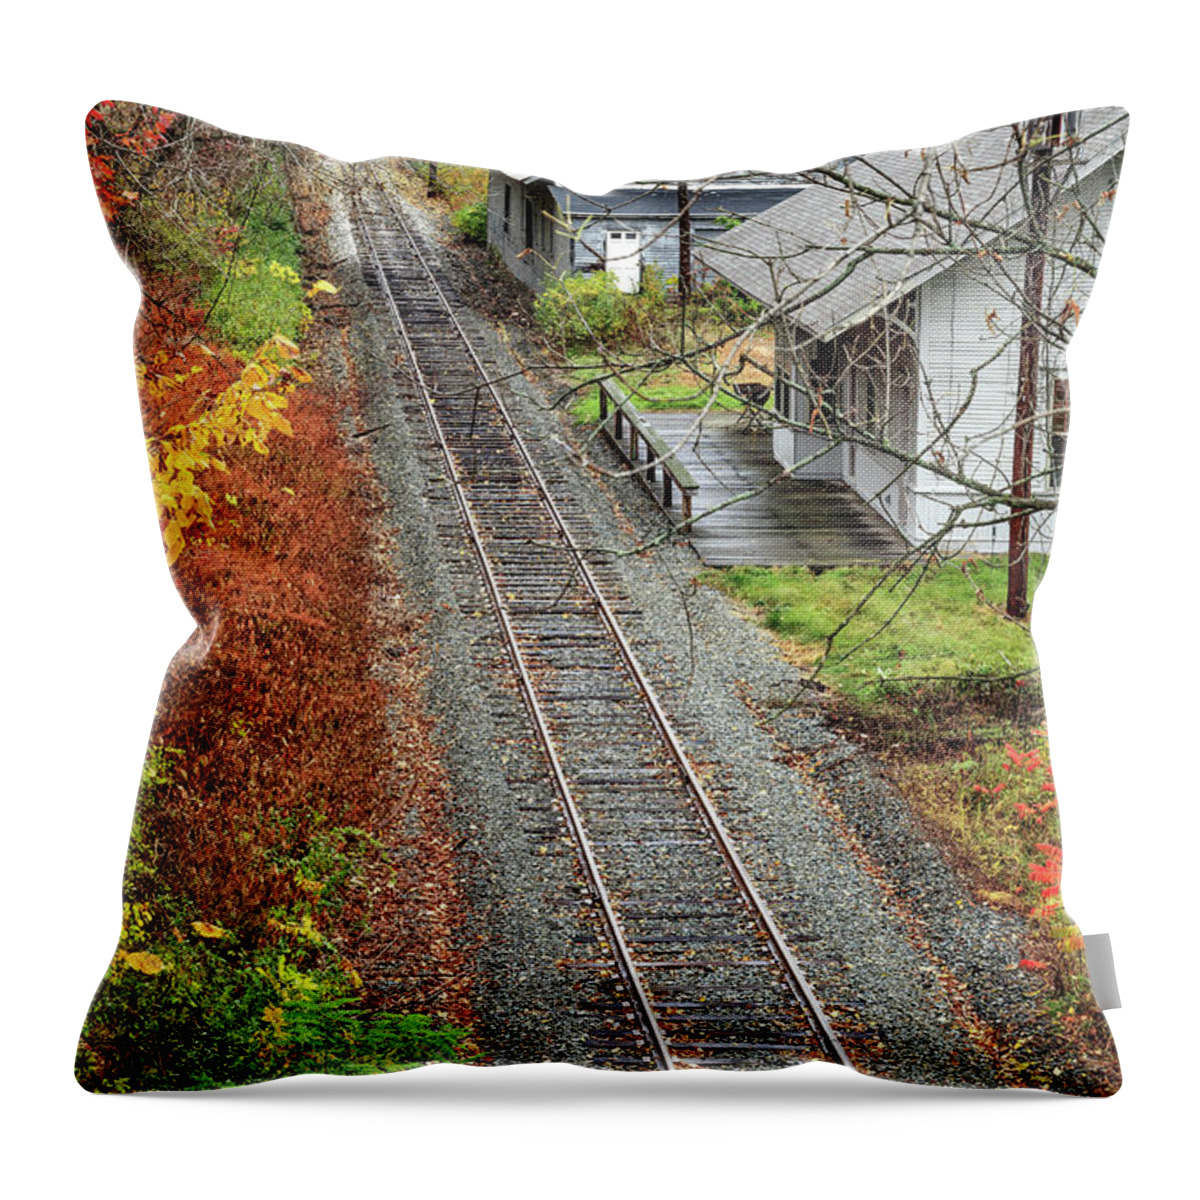 Train Throw Pillow featuring the photograph Old Train Station Norwich Vermont by Edward Fielding